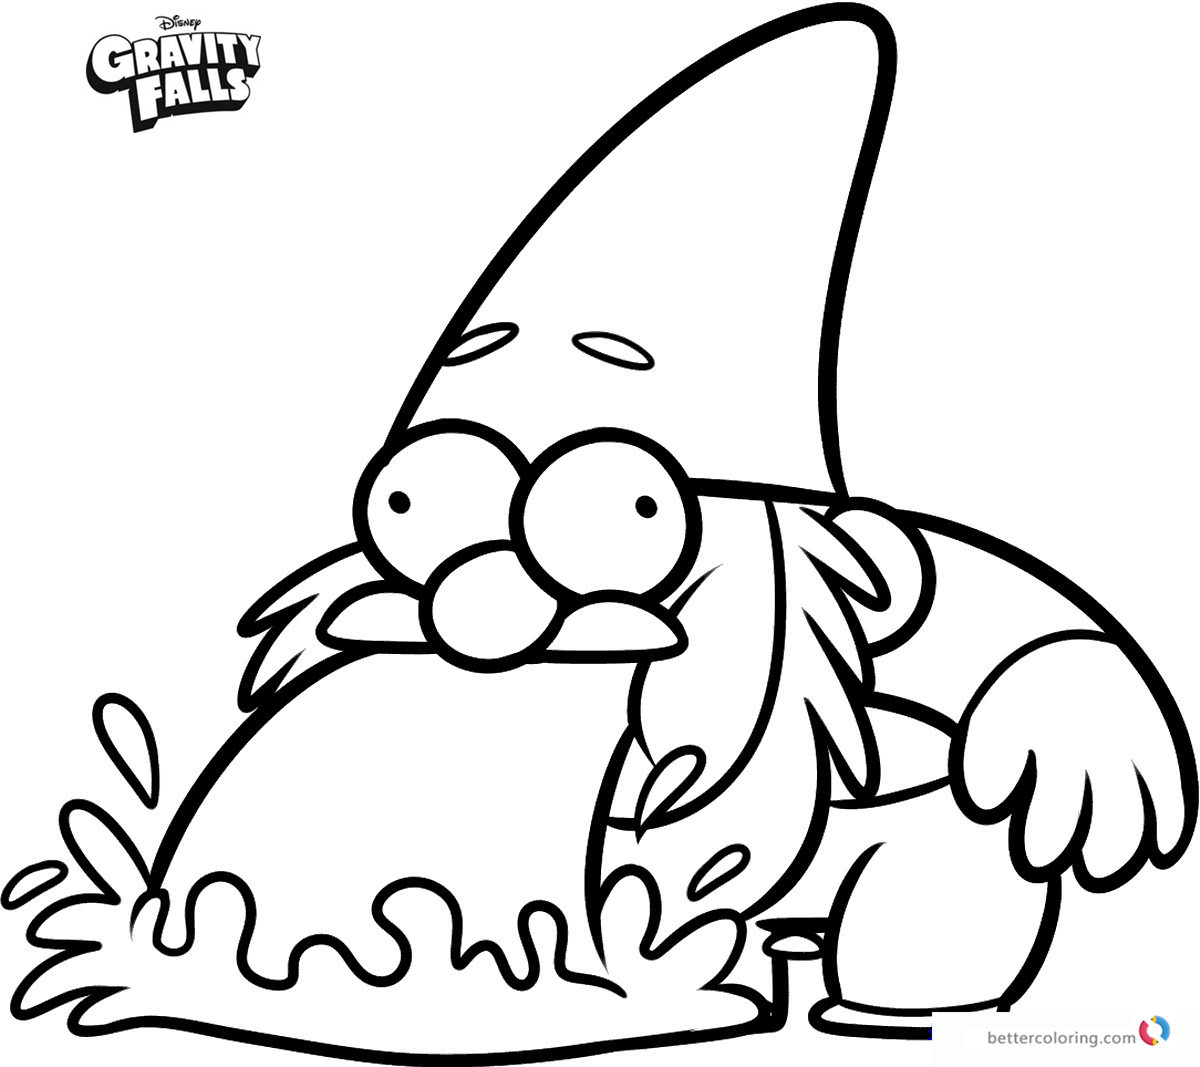 Gravity falls coloring pages Gnomes - Free Printable ...